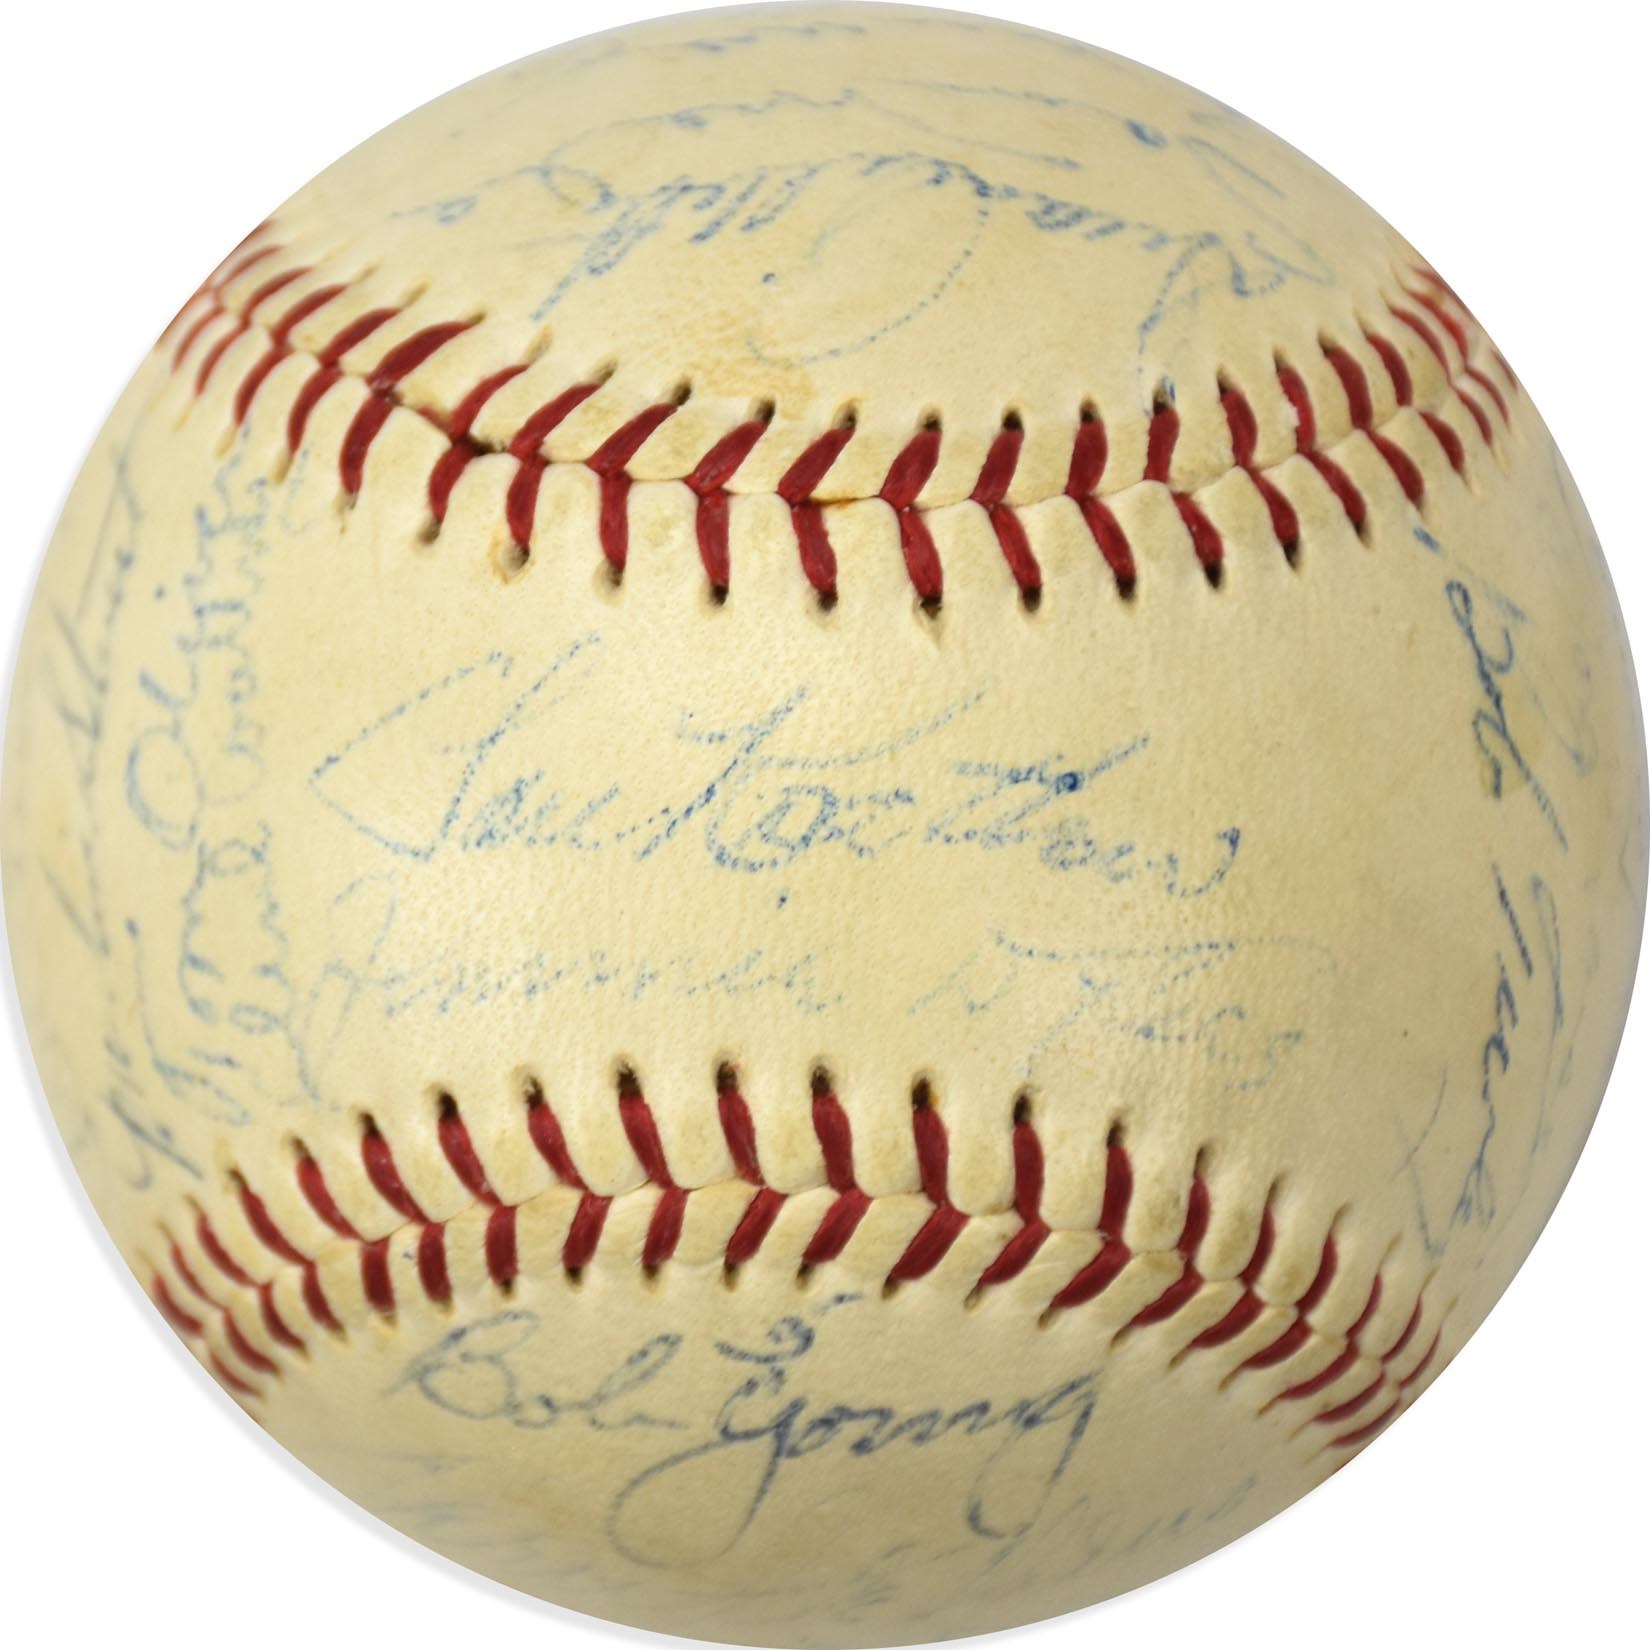 - 1954 Baltimore Orioles Team-Signed Baseball - First Year In Major Leagues (PSA)